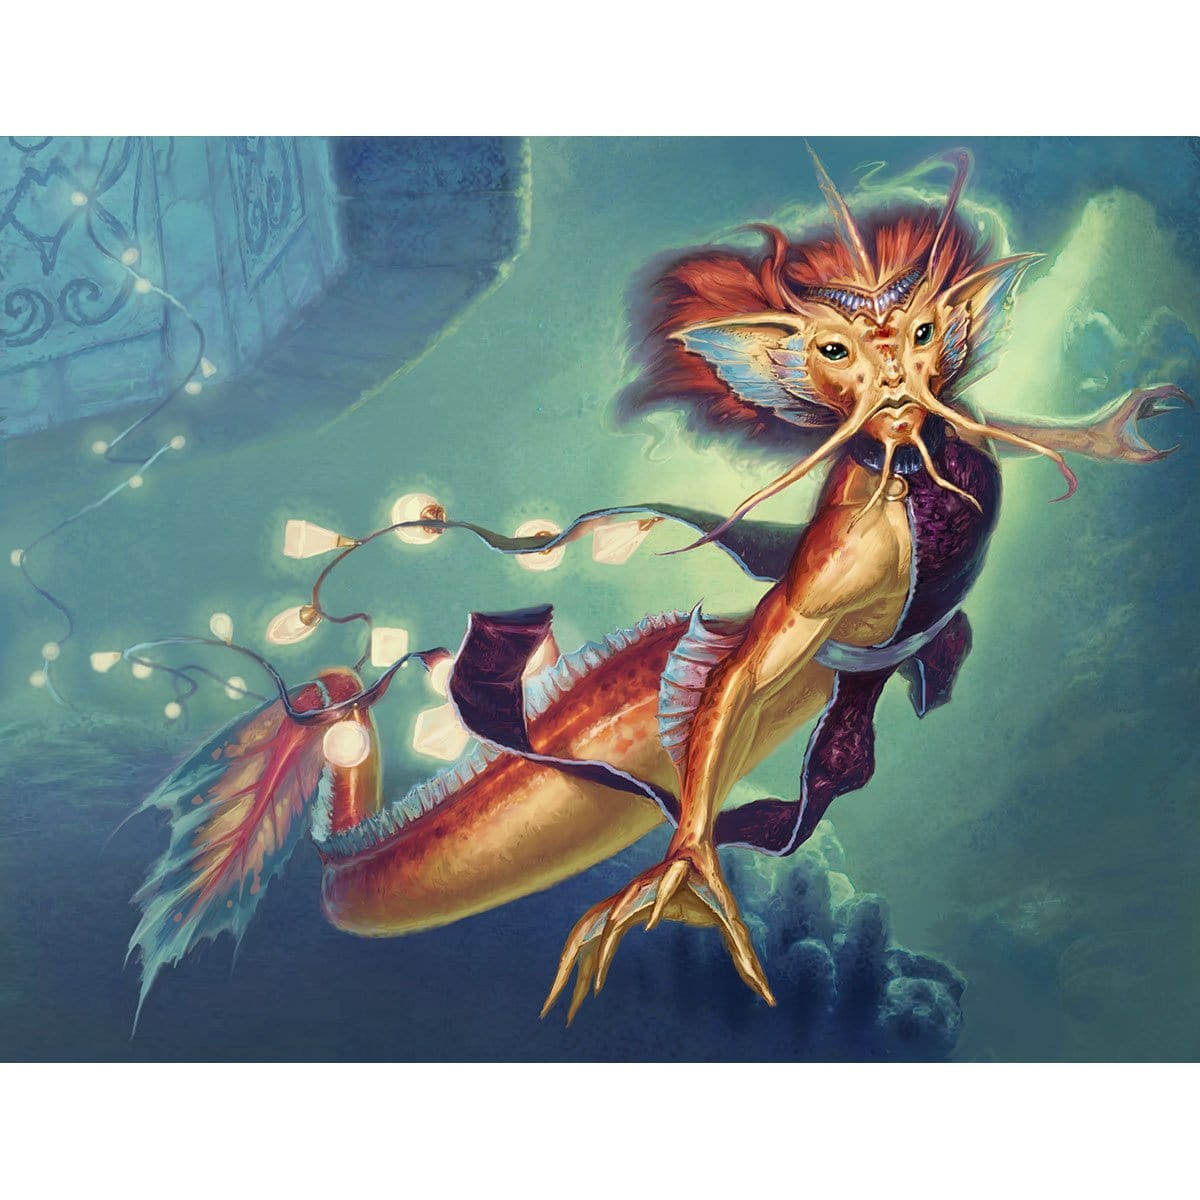 Silvergill Adept Print - Print - Original Magic Art - Accessories for Magic the Gathering and other card games